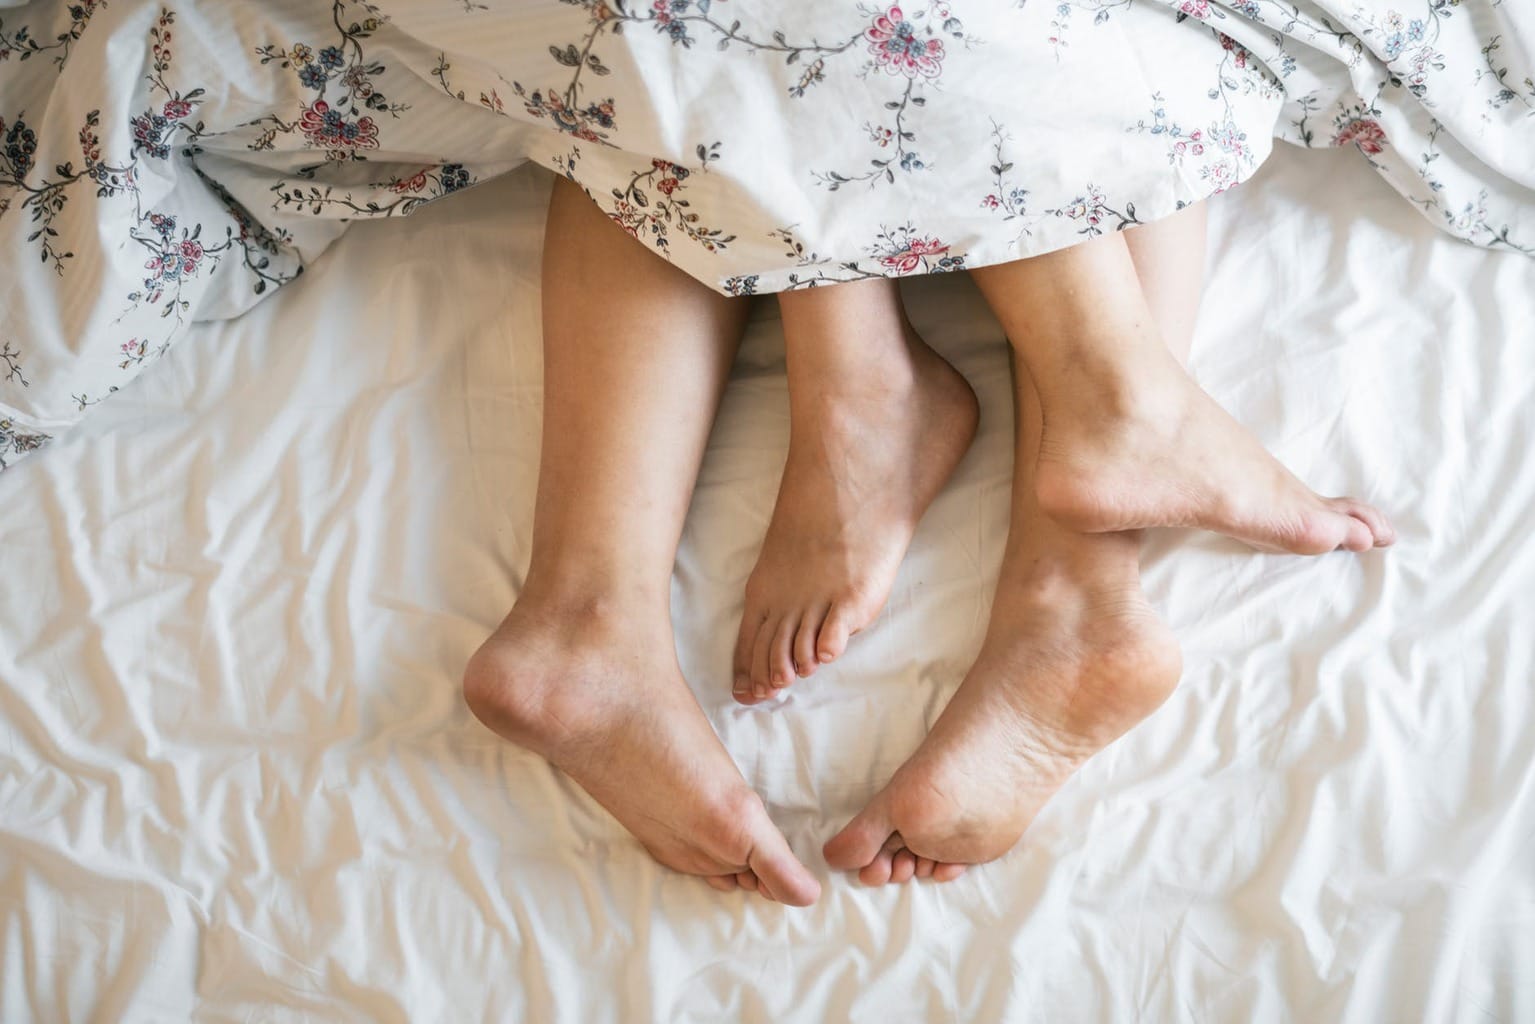 Two peoples' feet in a bed with a floral comforter